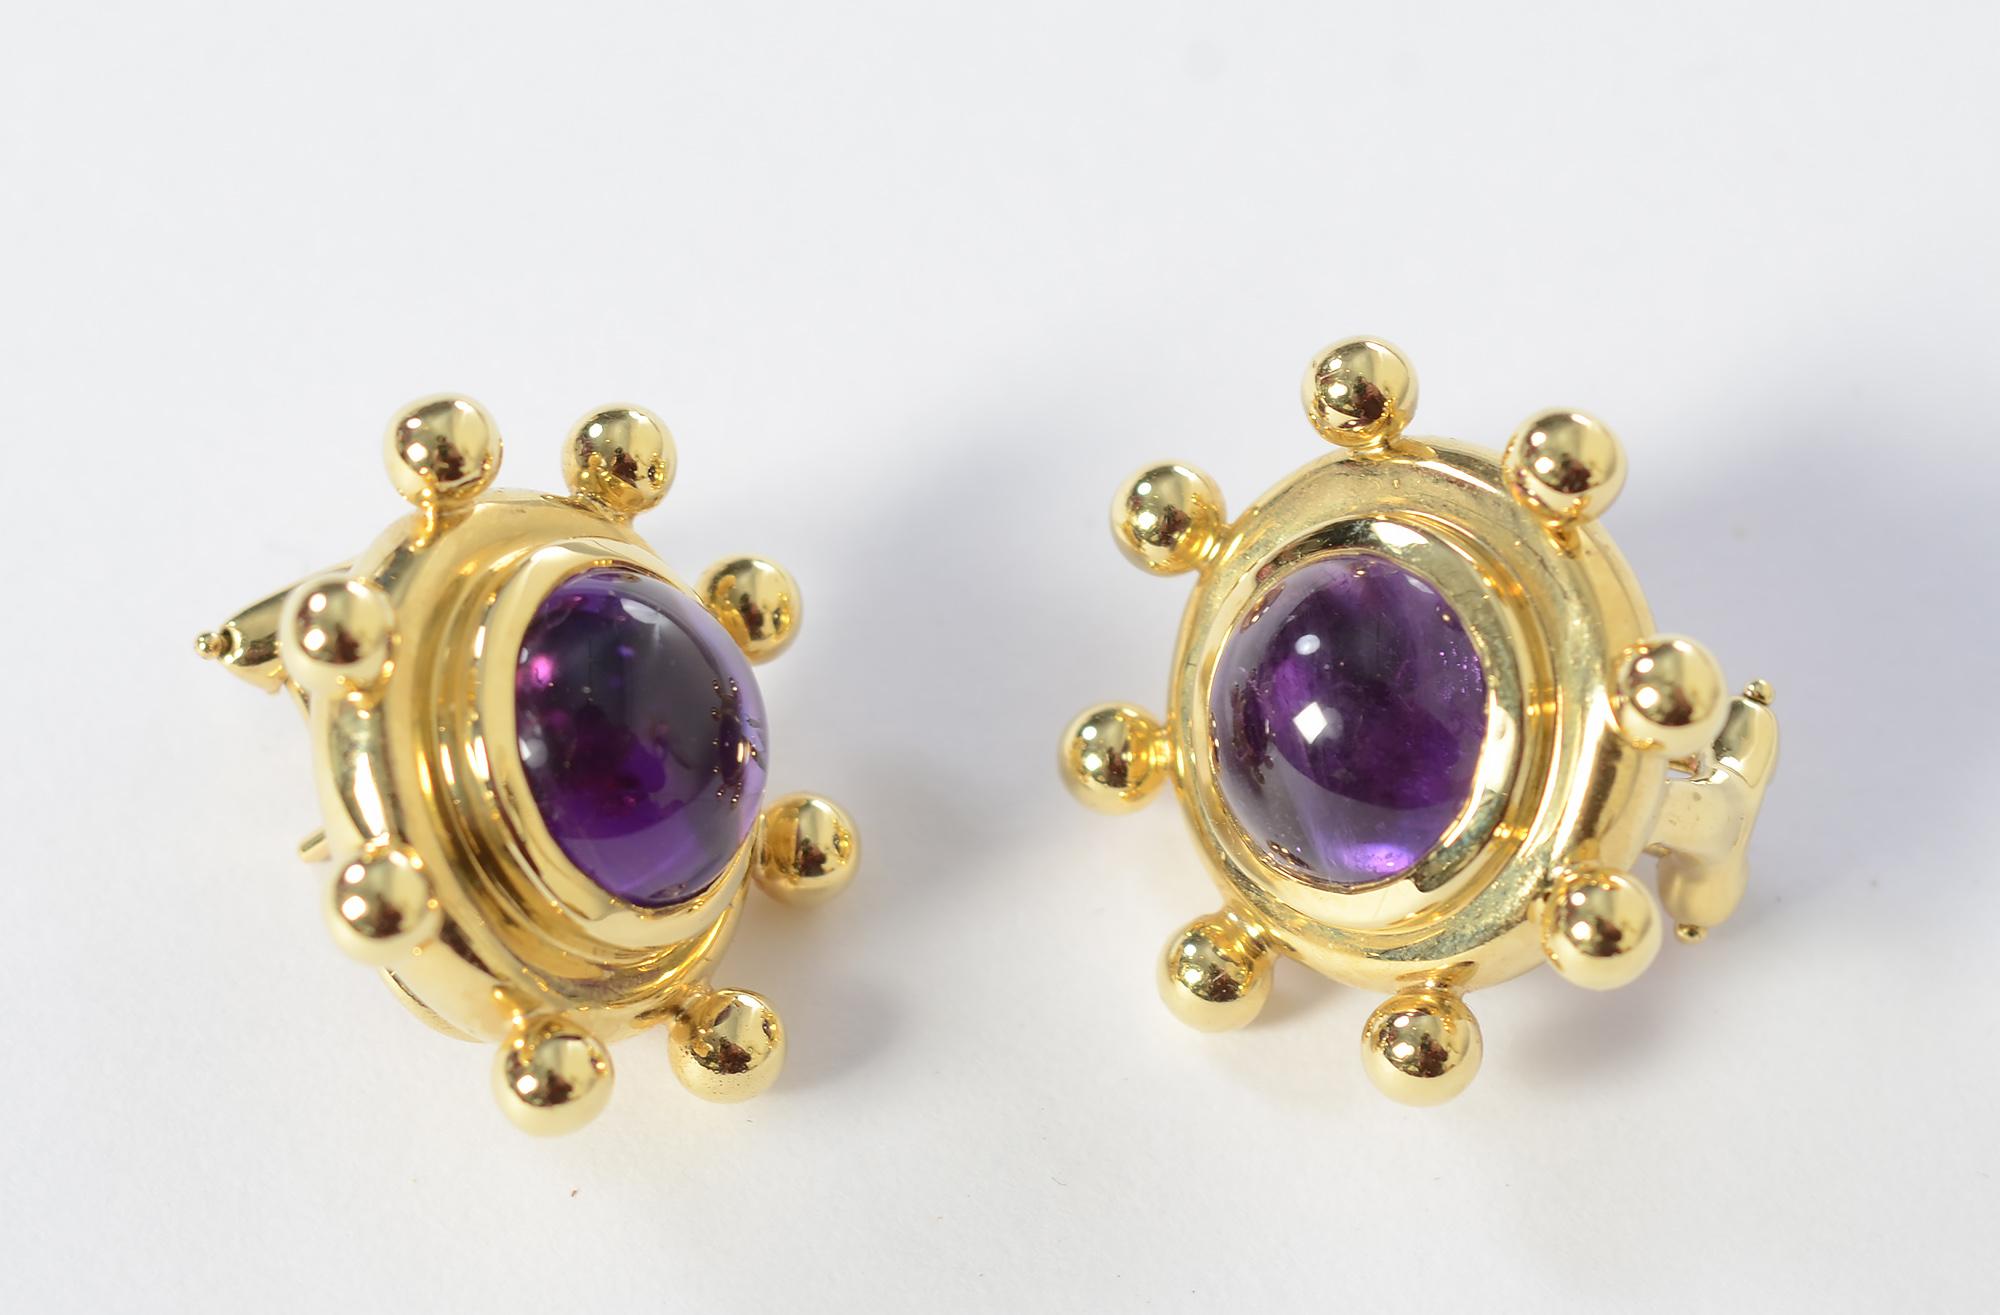 Chic 18 karat gold and amethyst earrings by Paloma Picasso for Tiffany. Each has a 9.3 mm richly colored amethyst surrounded by eight gold balls. Earrings are 15/16